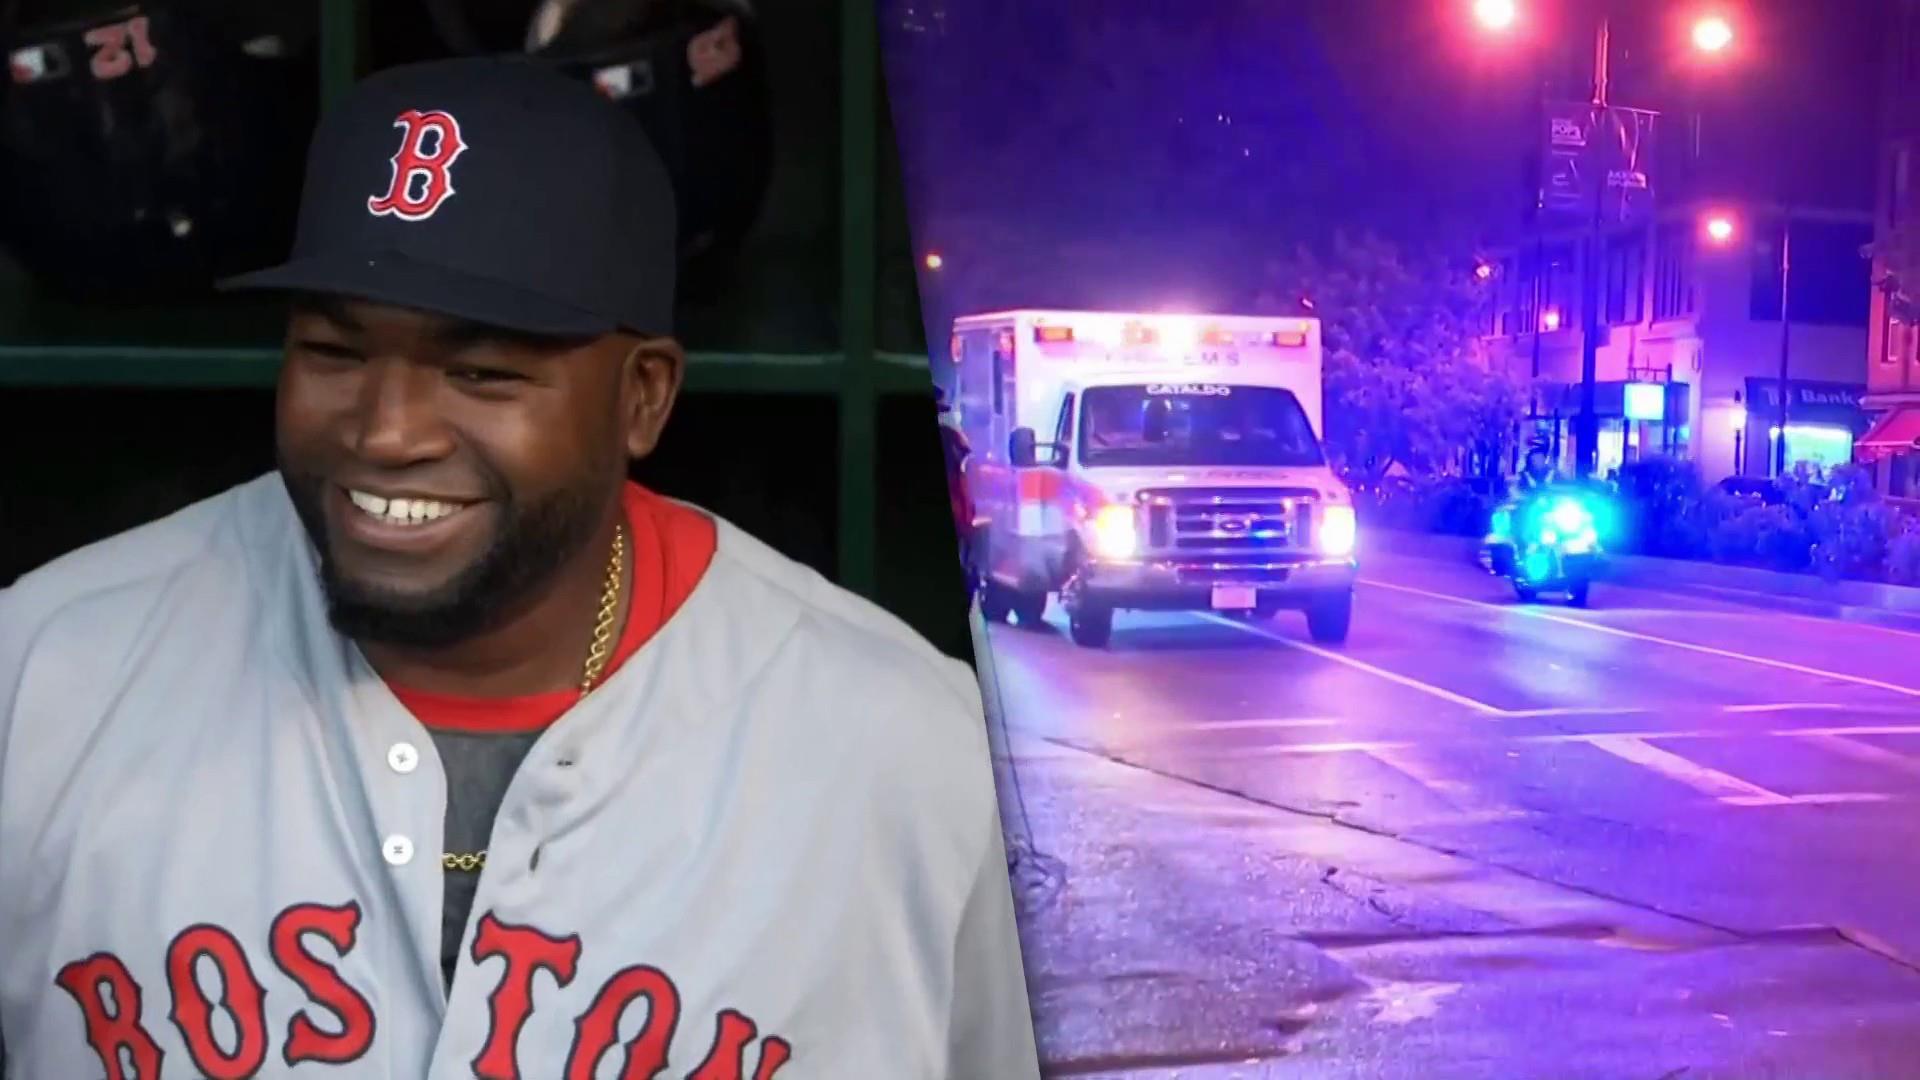 Red Sox legend David Ortiz undergoes second surgery in U.S. after shooting